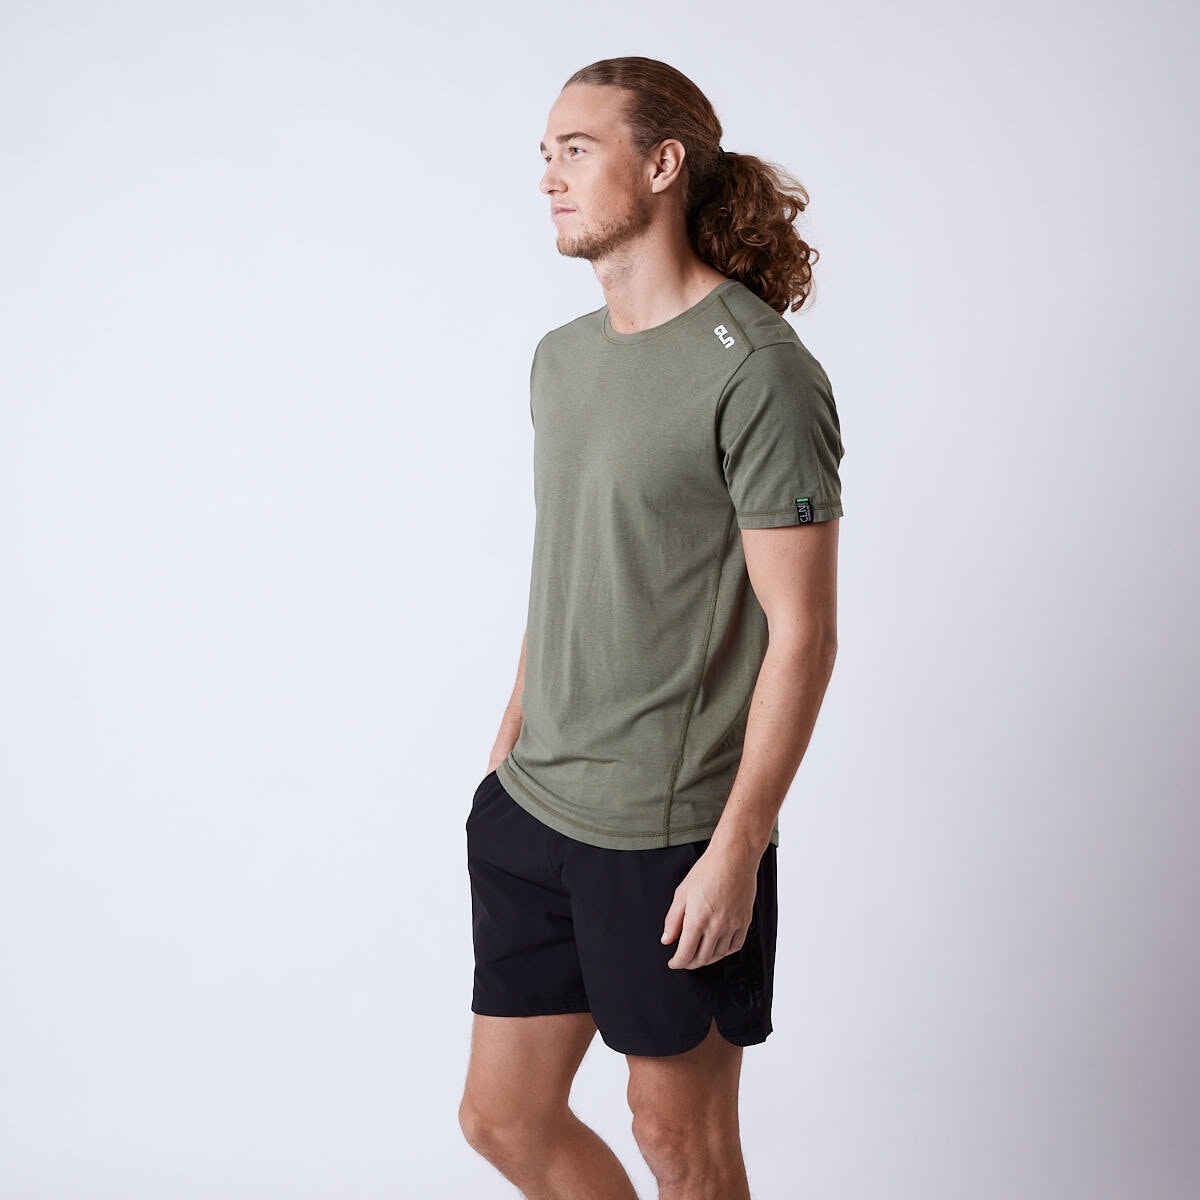 Trap bamboo t-shirt Dusty olive